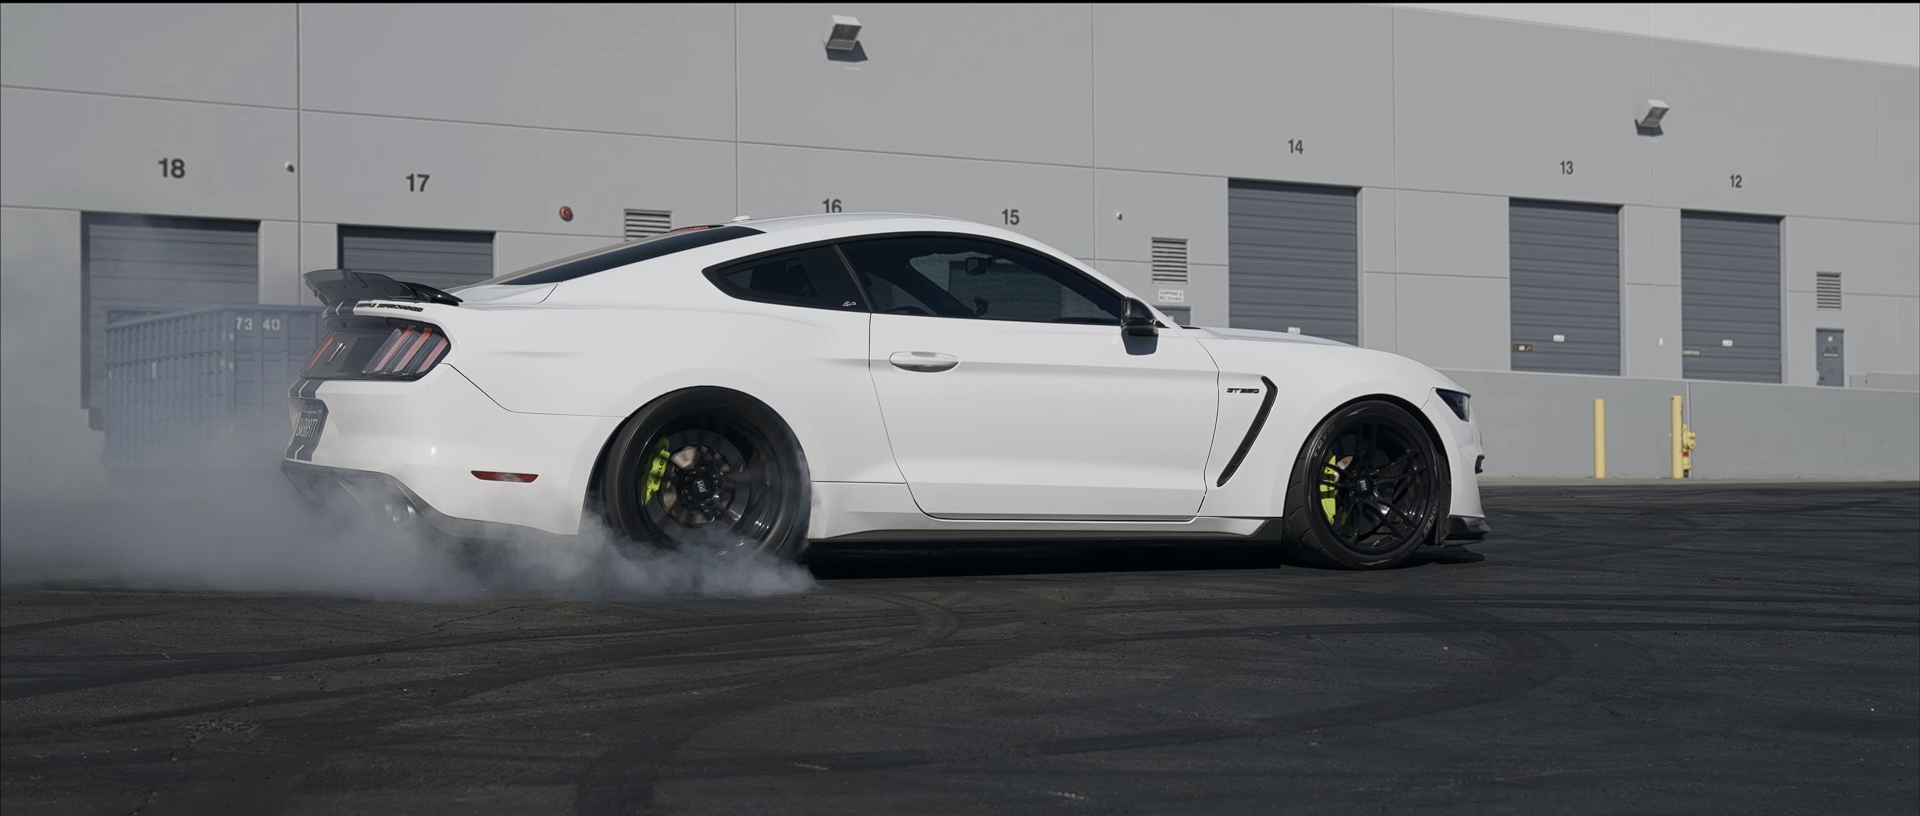 Awesome Video Of Shelby GT350s Doing Burnouts